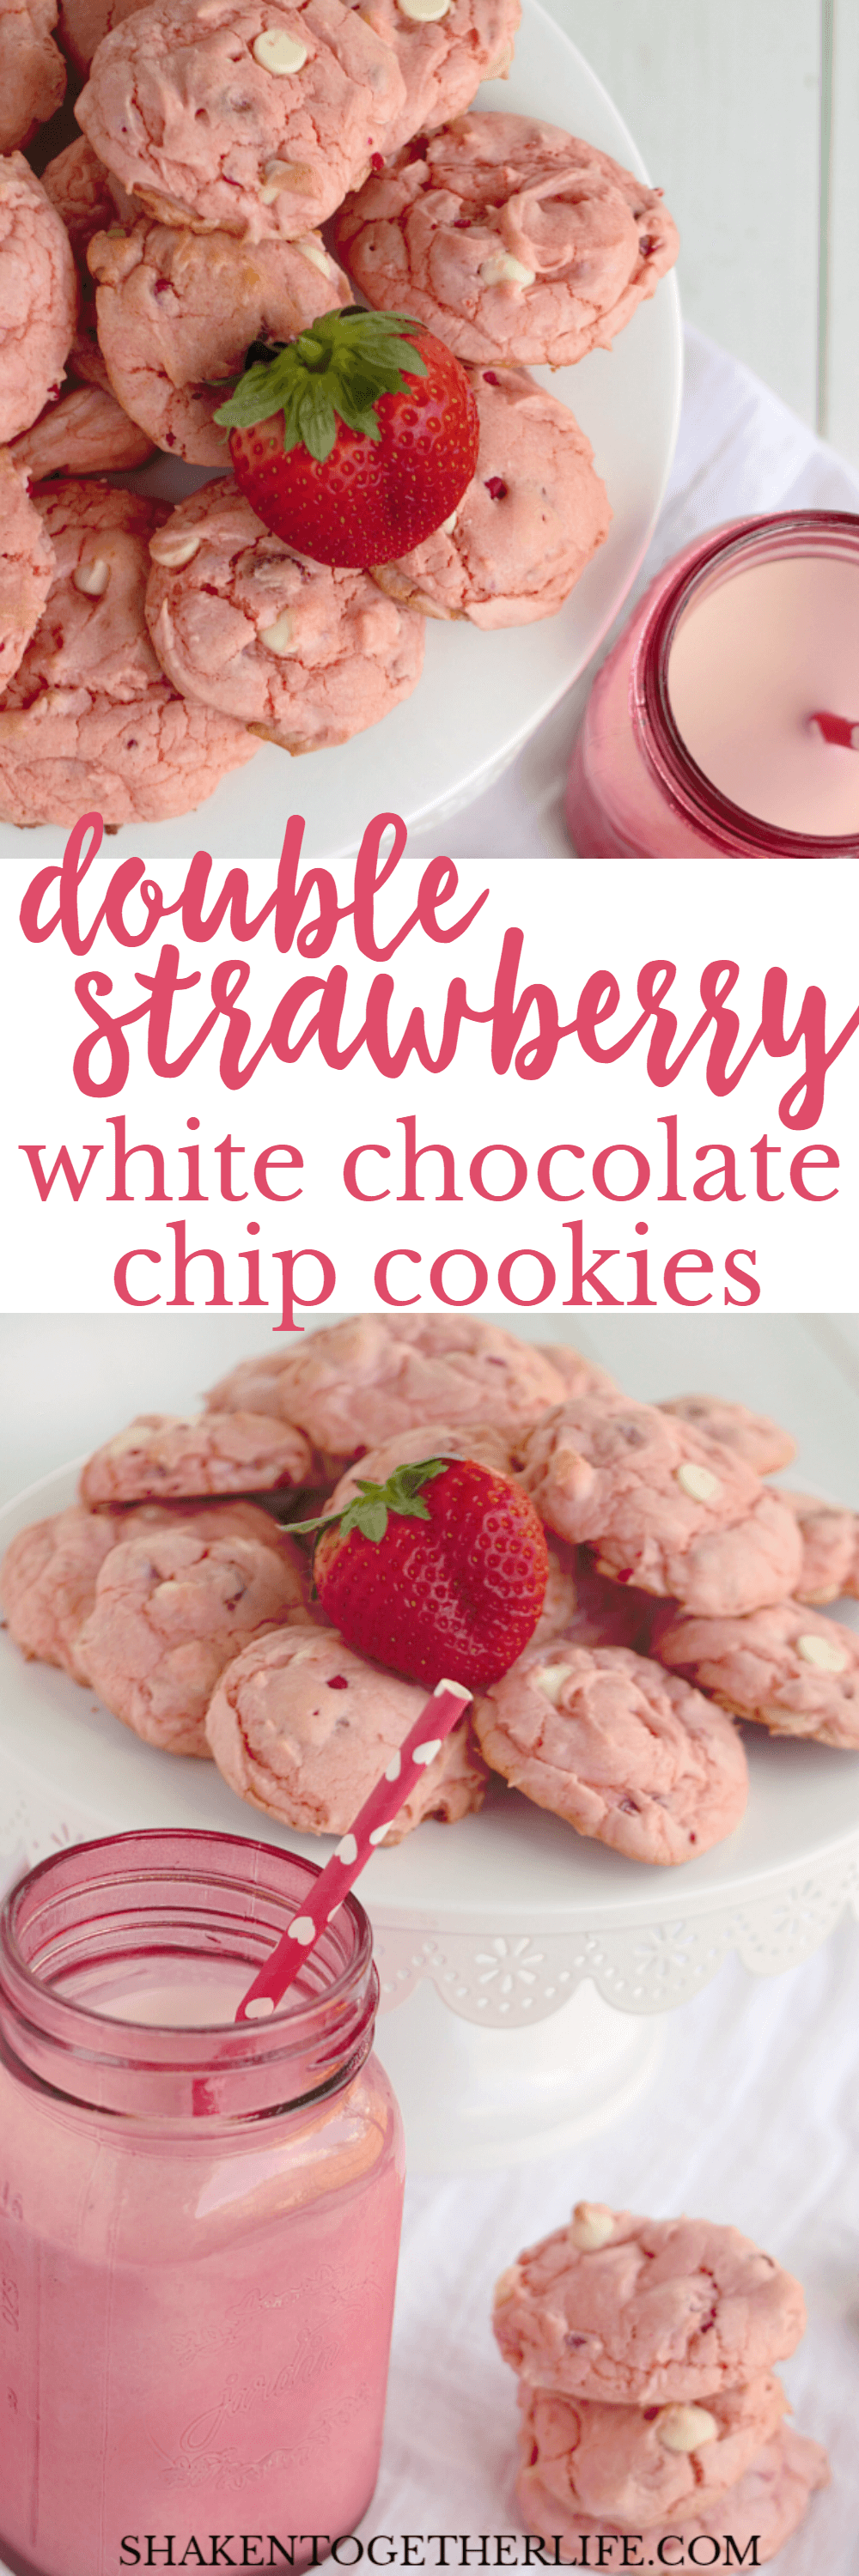 Double Strawberry White Chocolate Chip Cookies - these one bowl wonders start with a cake mix so they are as easy as they are delicious!